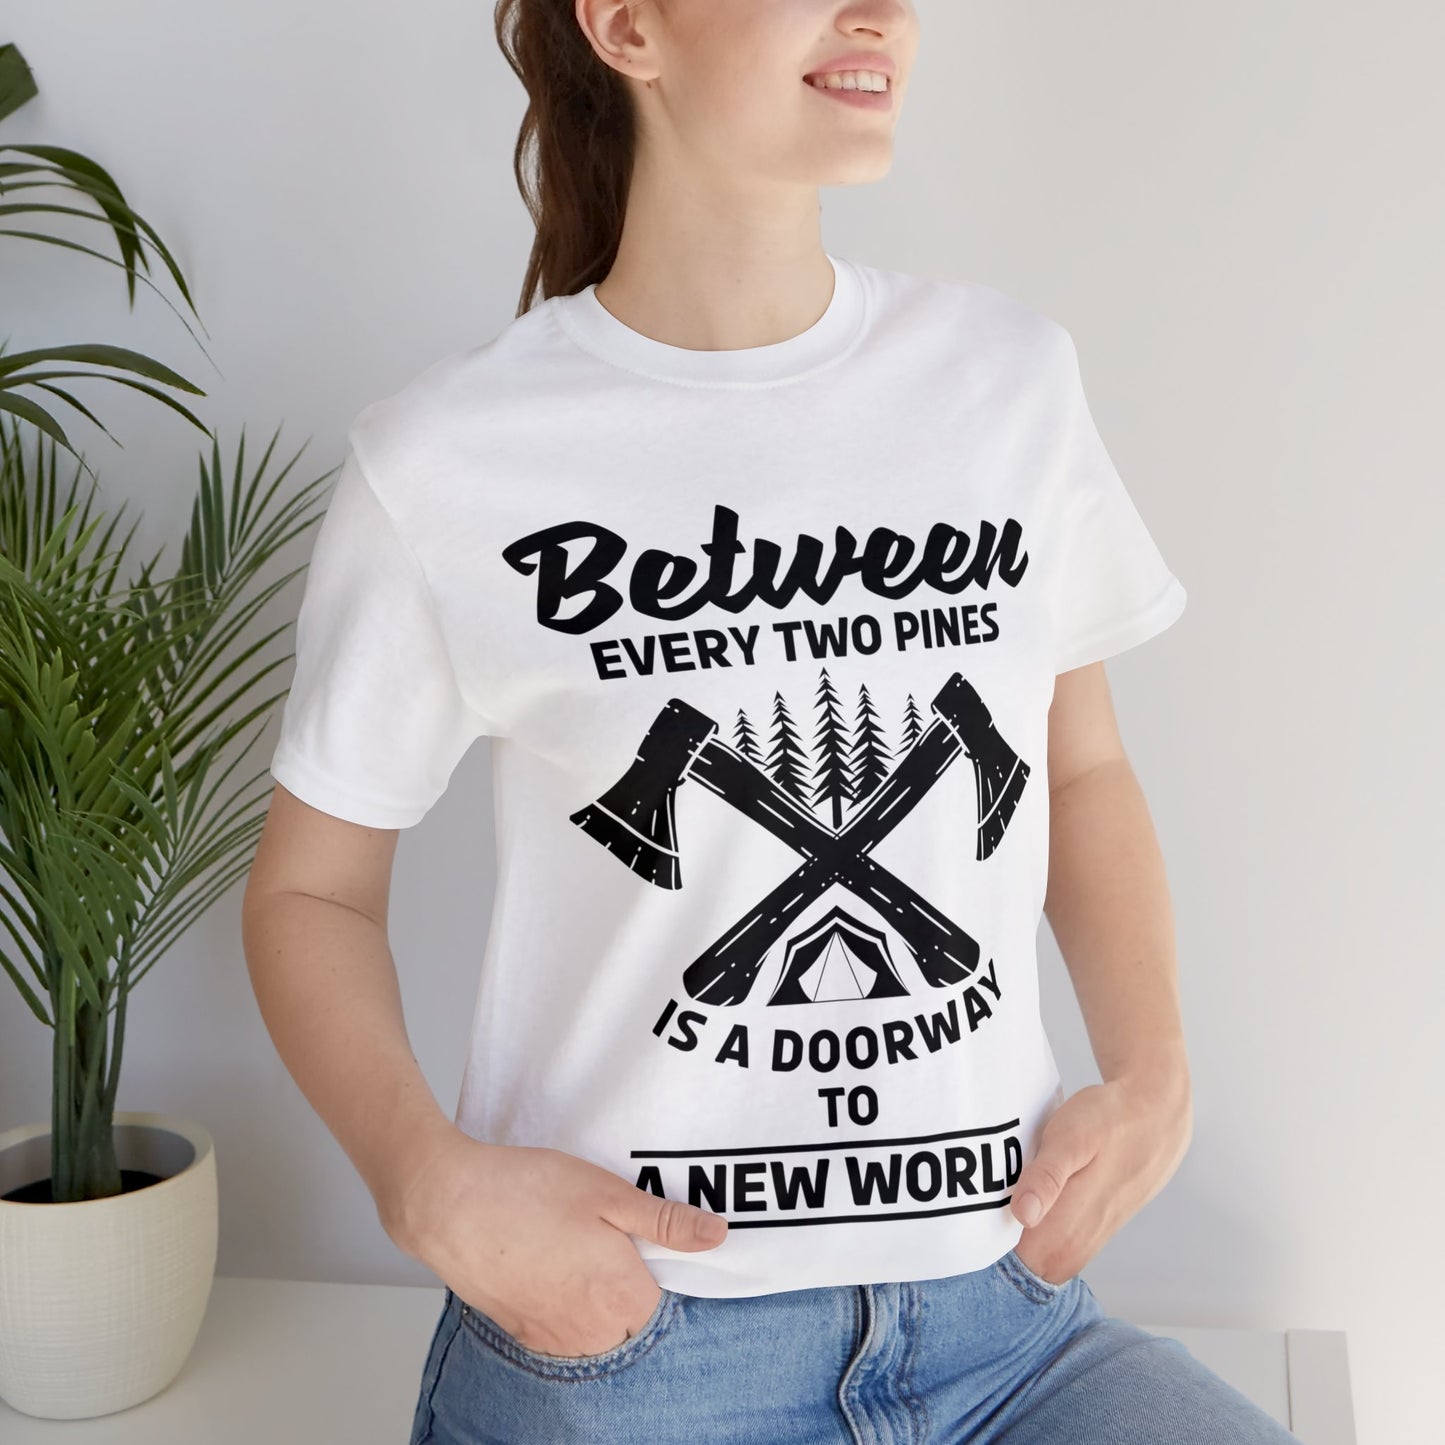 Between every two pins is a dooeway to a new world  T-Shirt